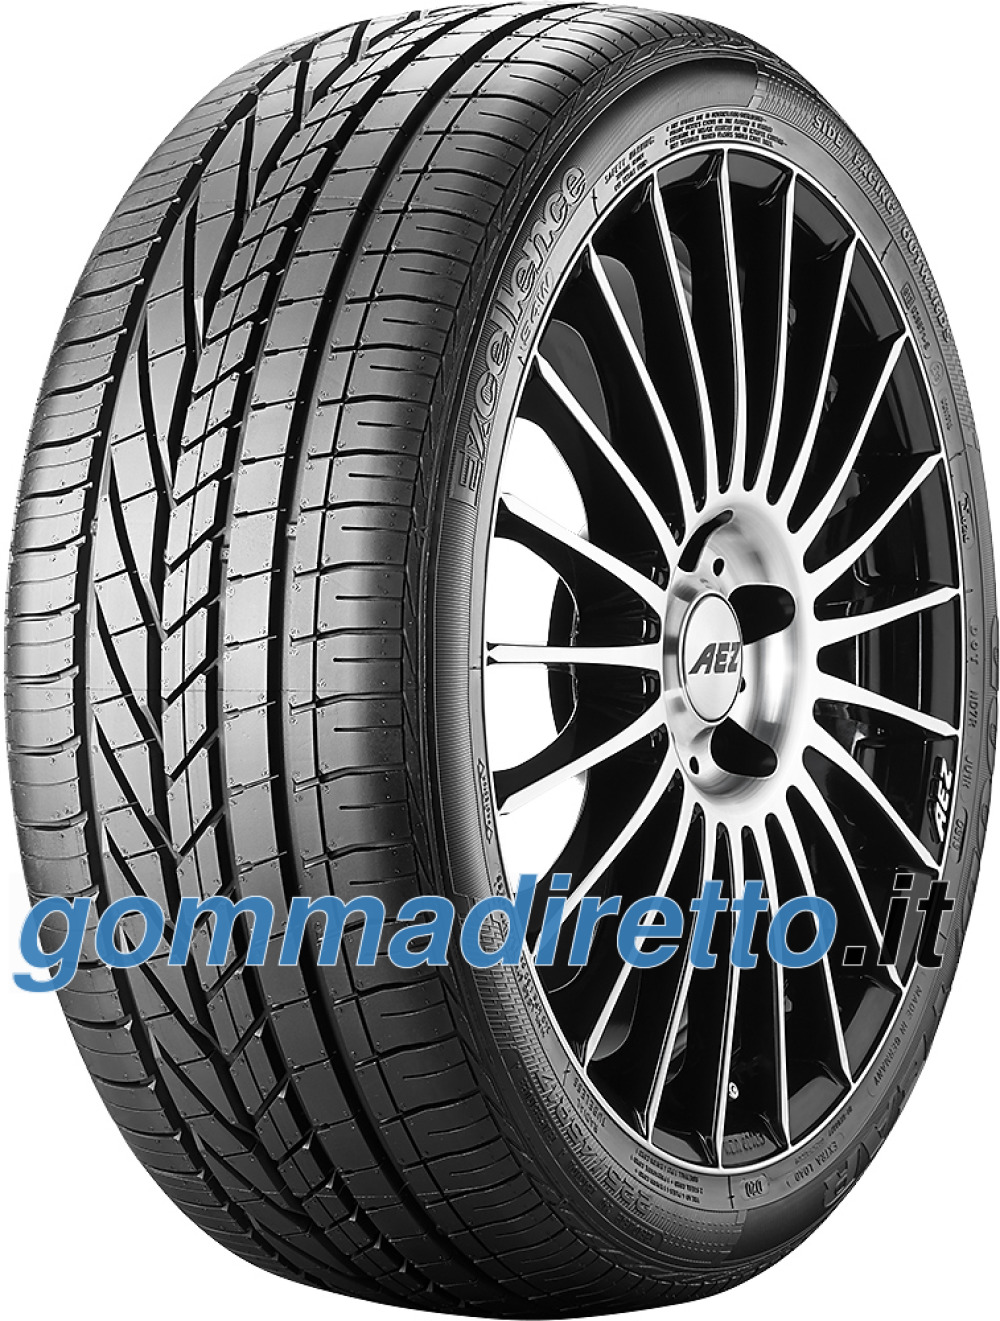 Image of Goodyear Excellence ( 235/55 R17 99V AO )